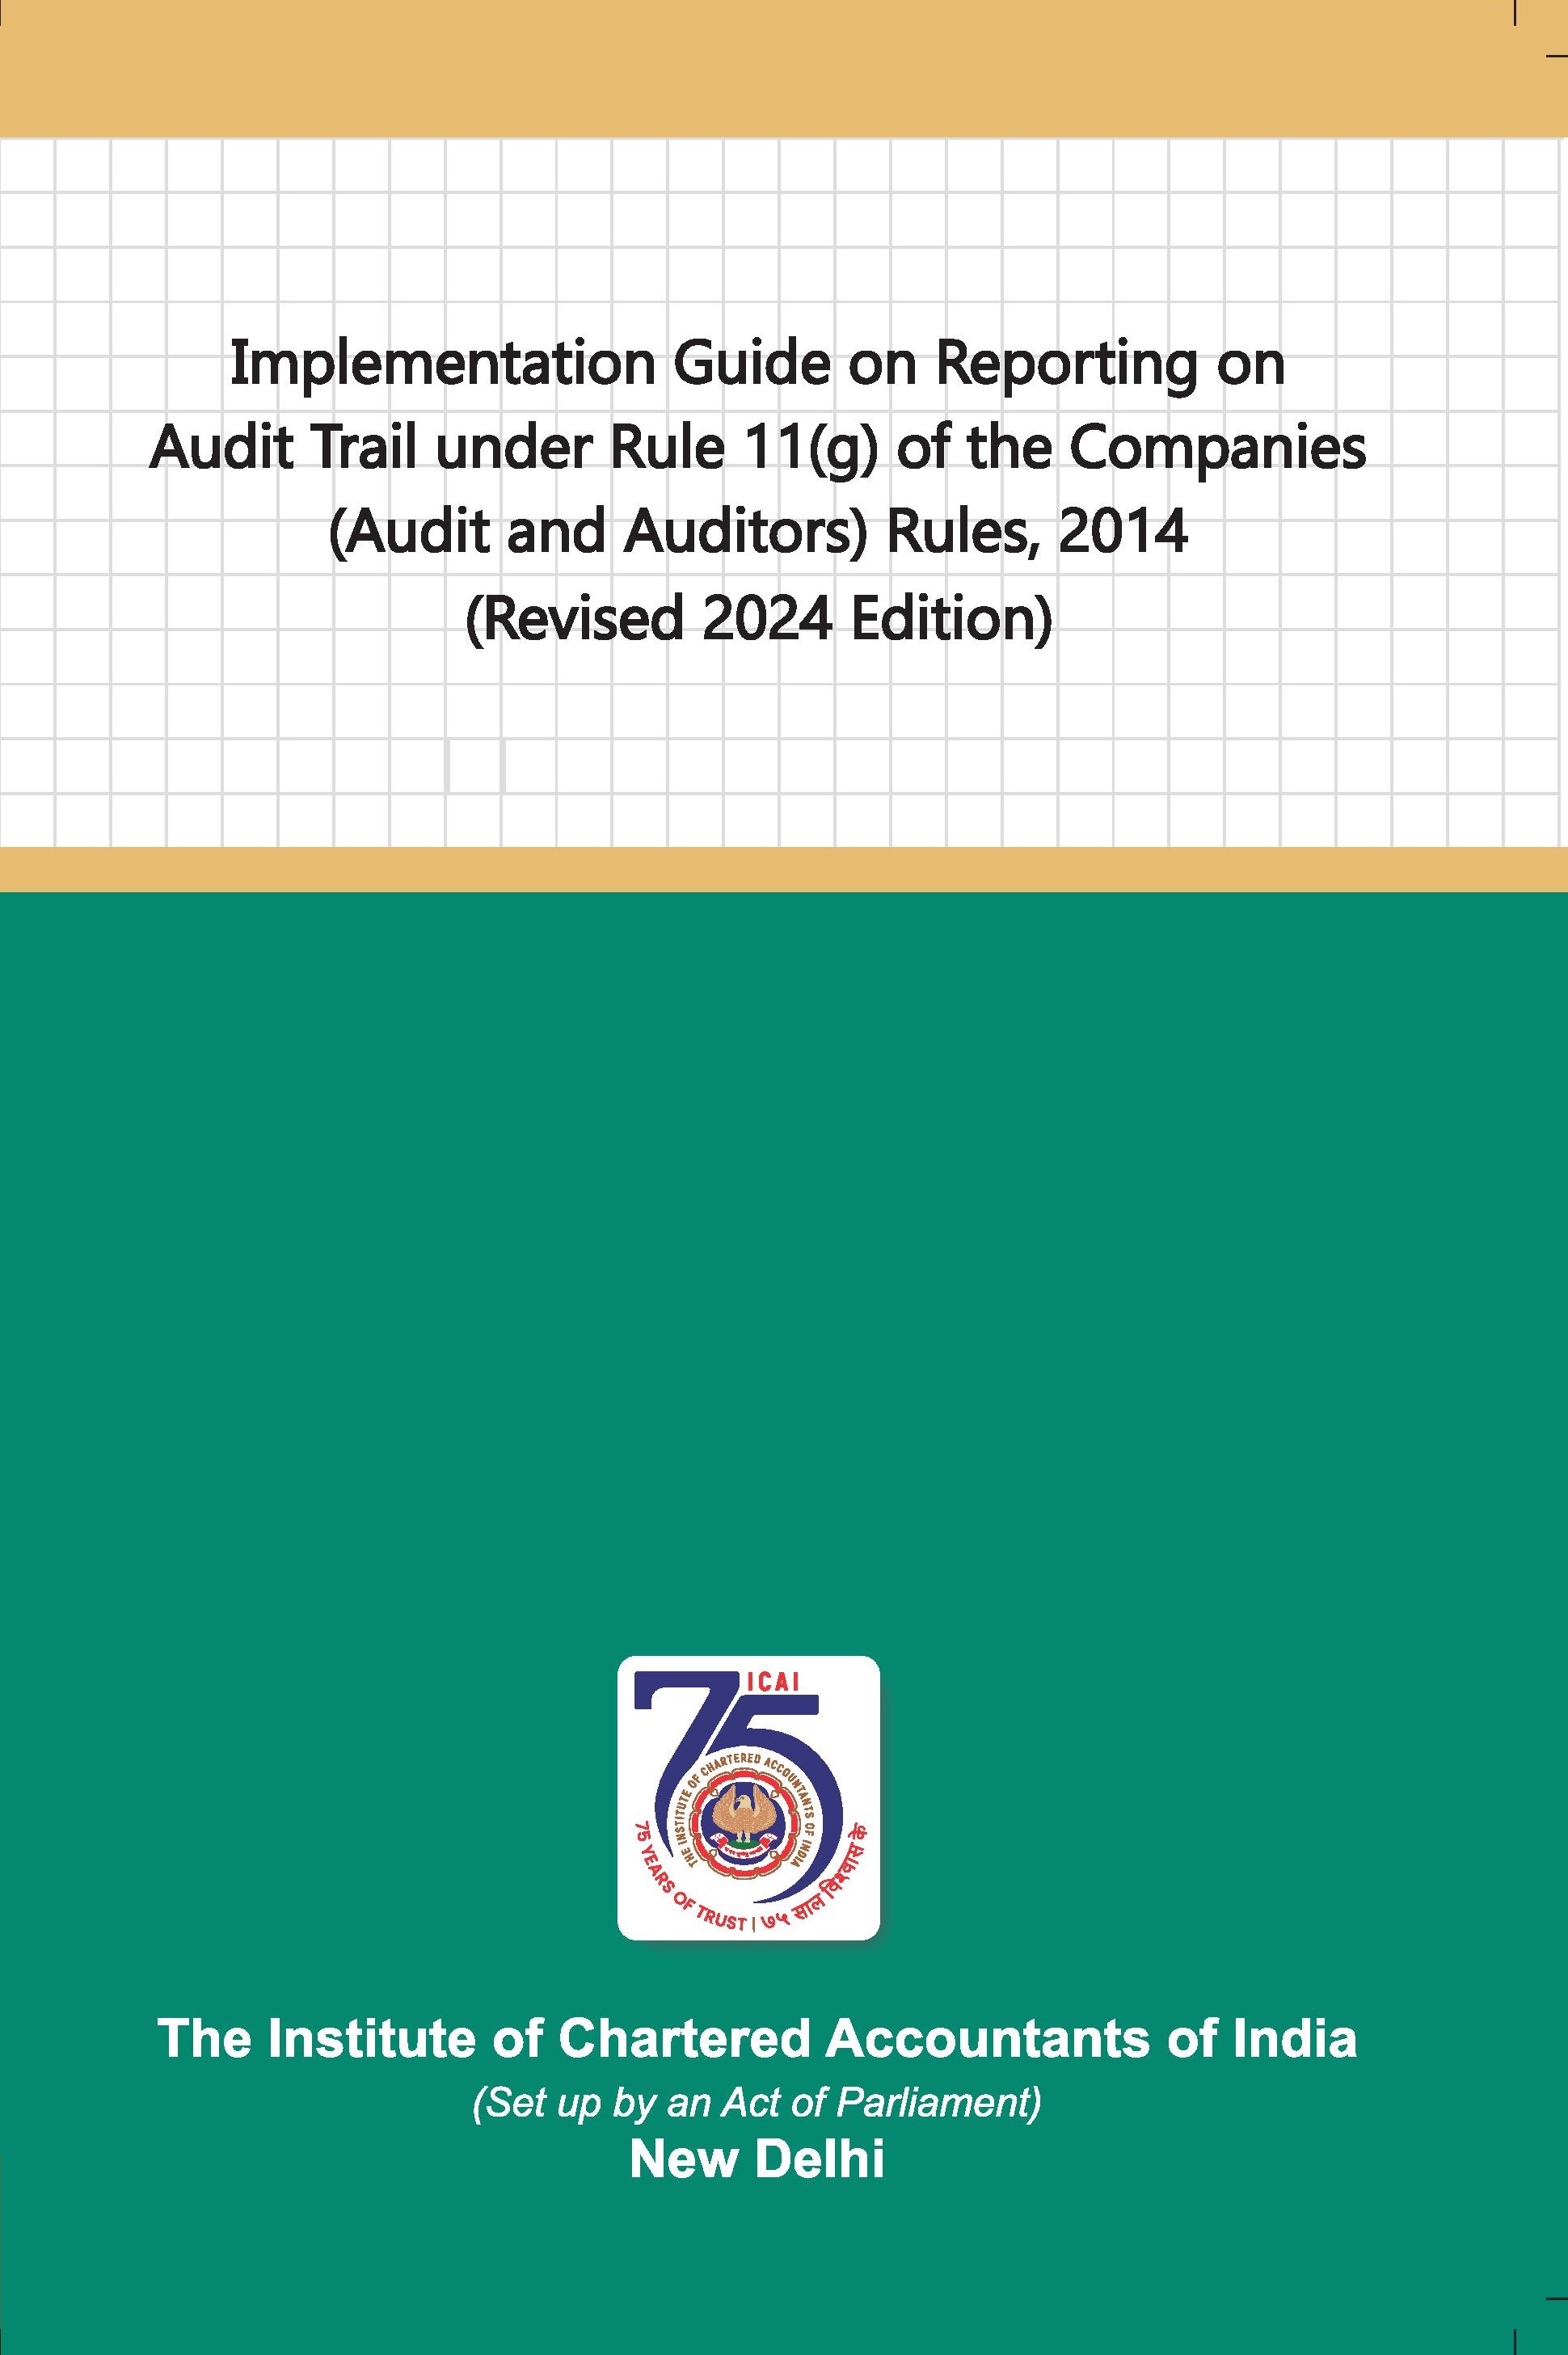 Implementation Guide on Reporting on Audit Trail under Rule 11(g) of the Companies (Audit and Auditors) Rules, 2014 -  (Revised 2024 Edition)